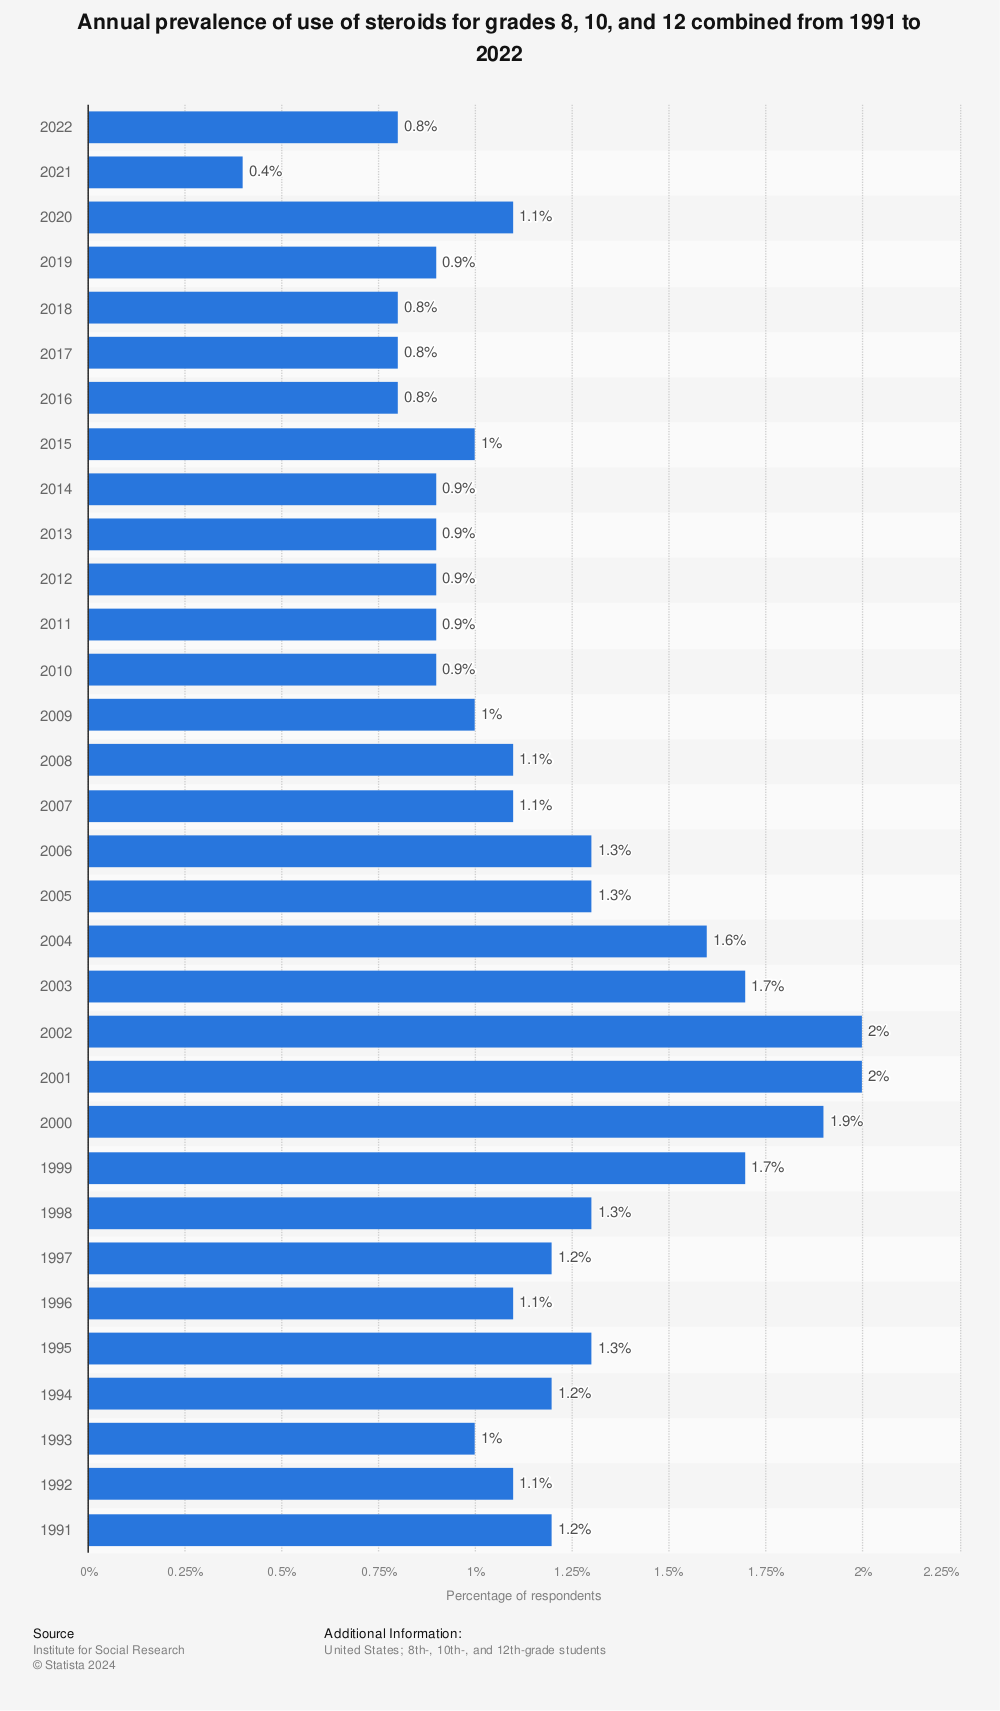 Statistic: Annual prevalence of use of steroids for grades 8, 10 and 12 combined from 1991 to 2020 | Statista